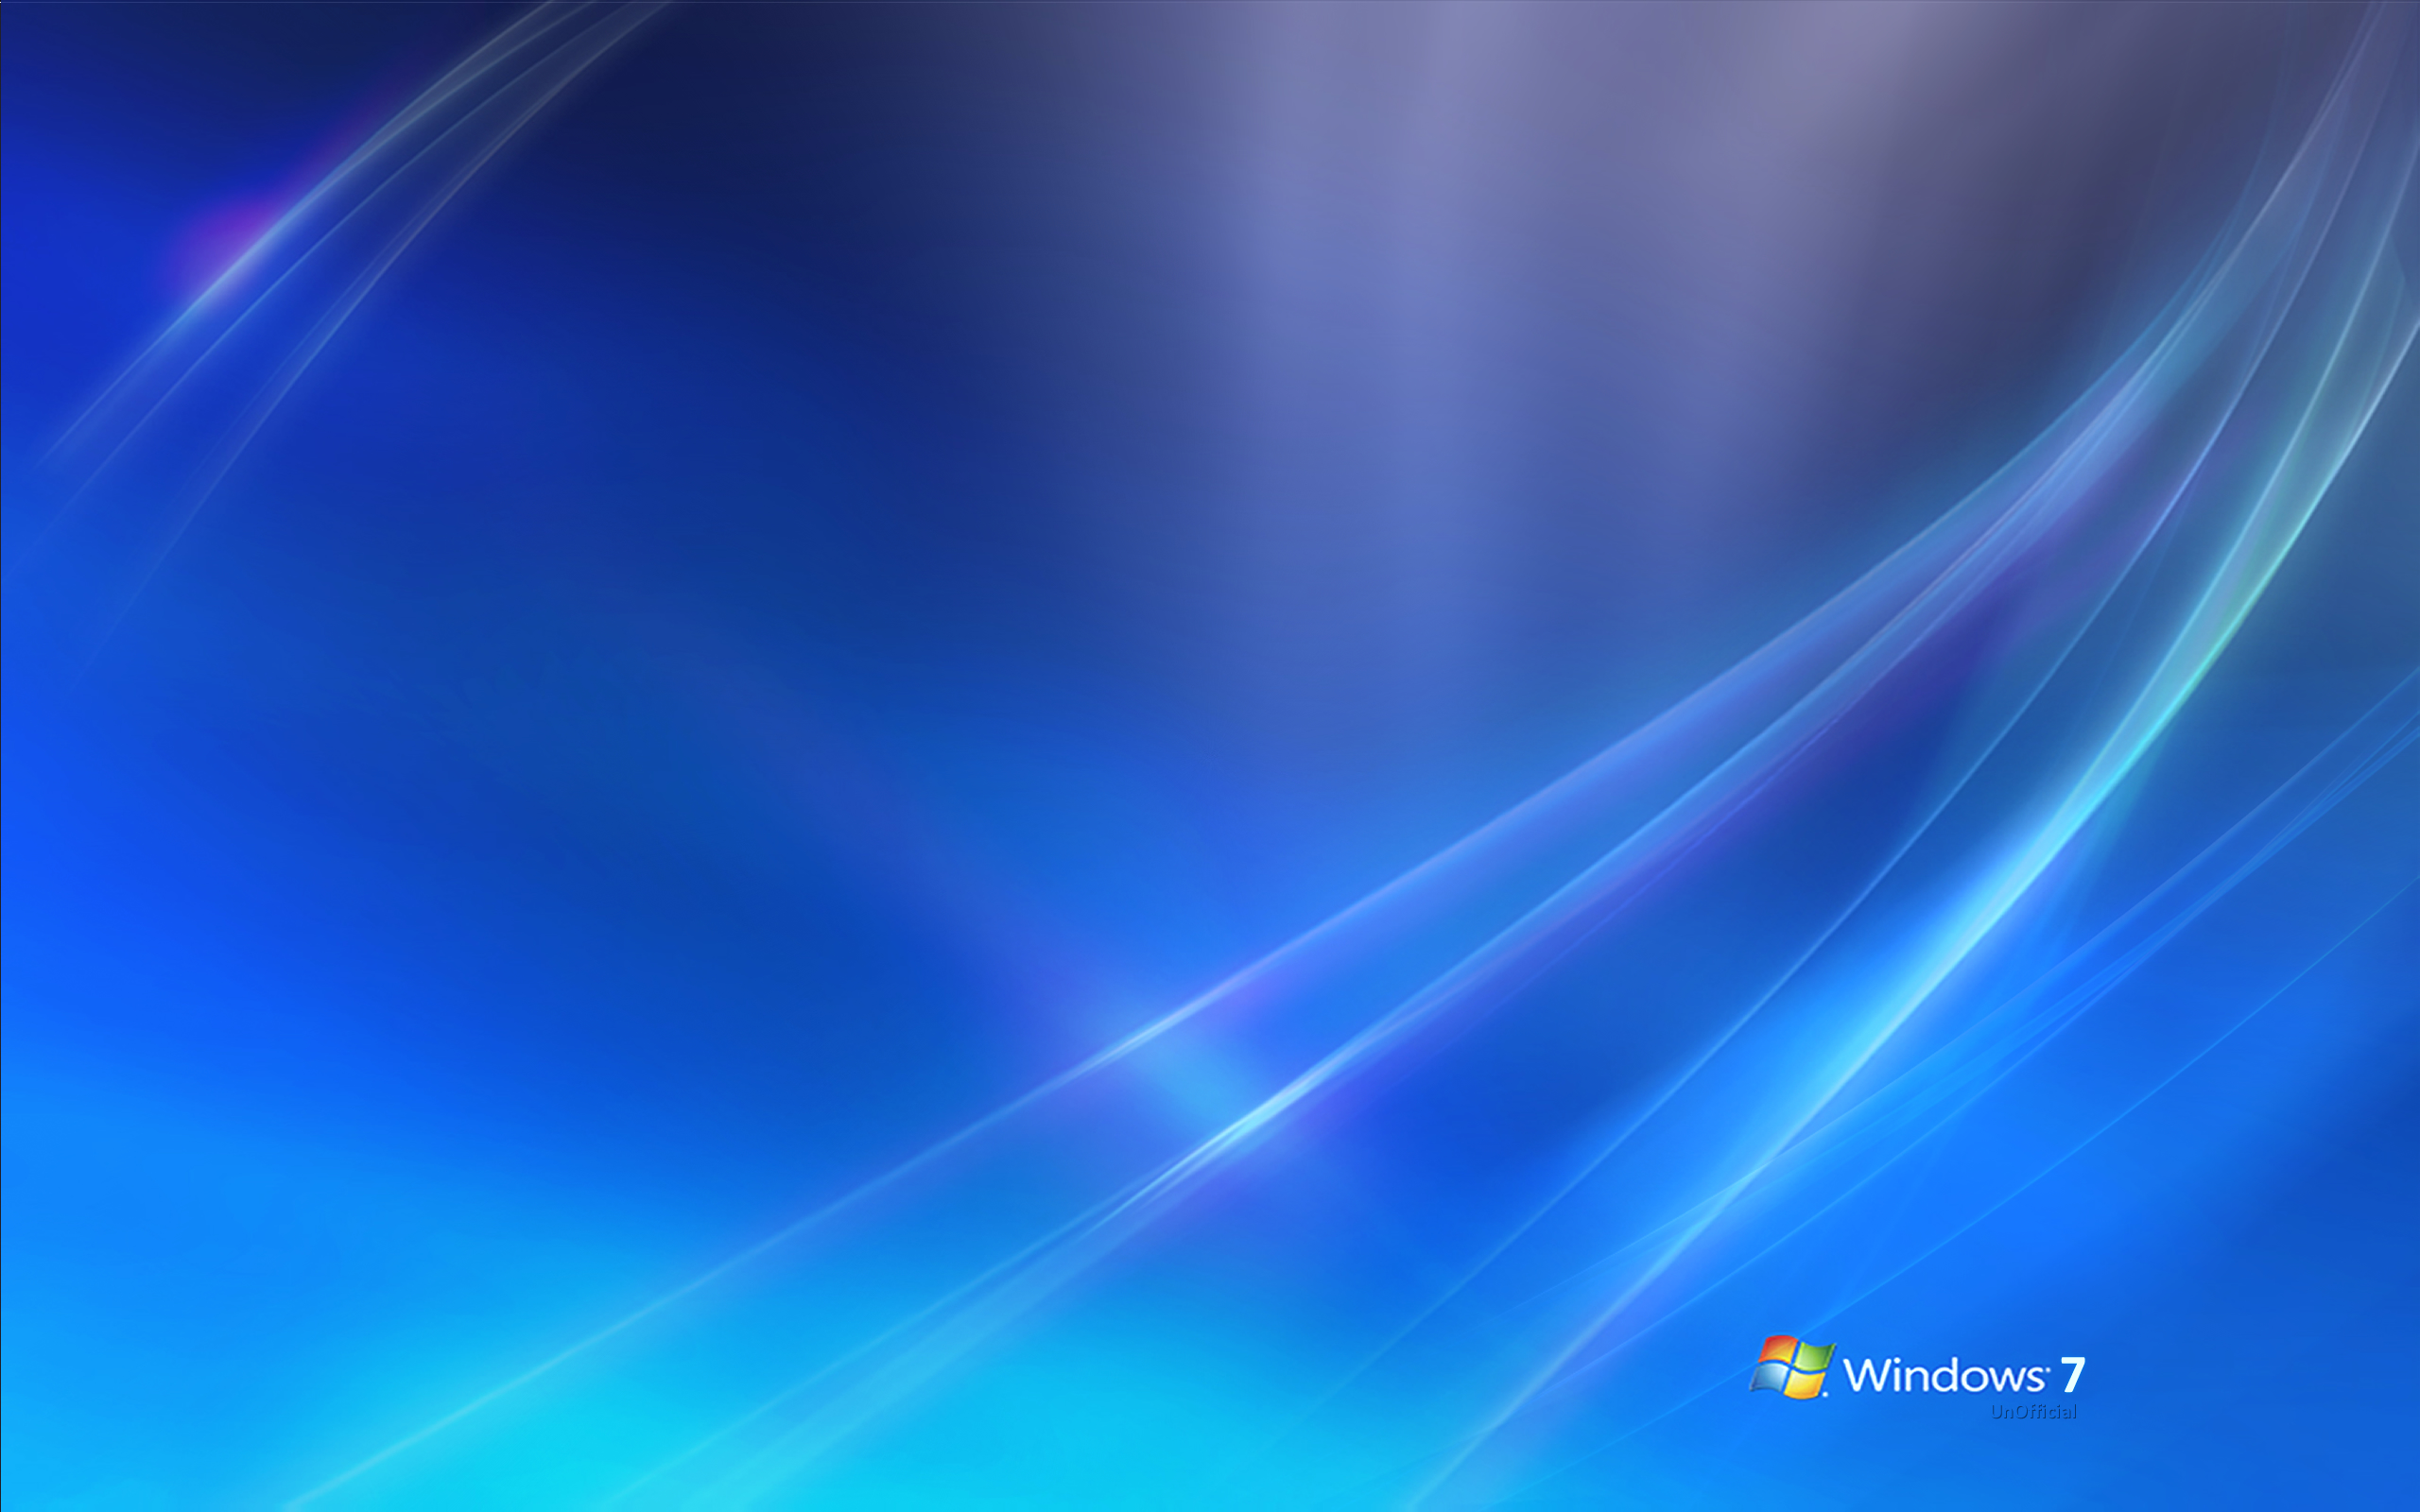 My previous post about Official Windows 7 Wallpaper